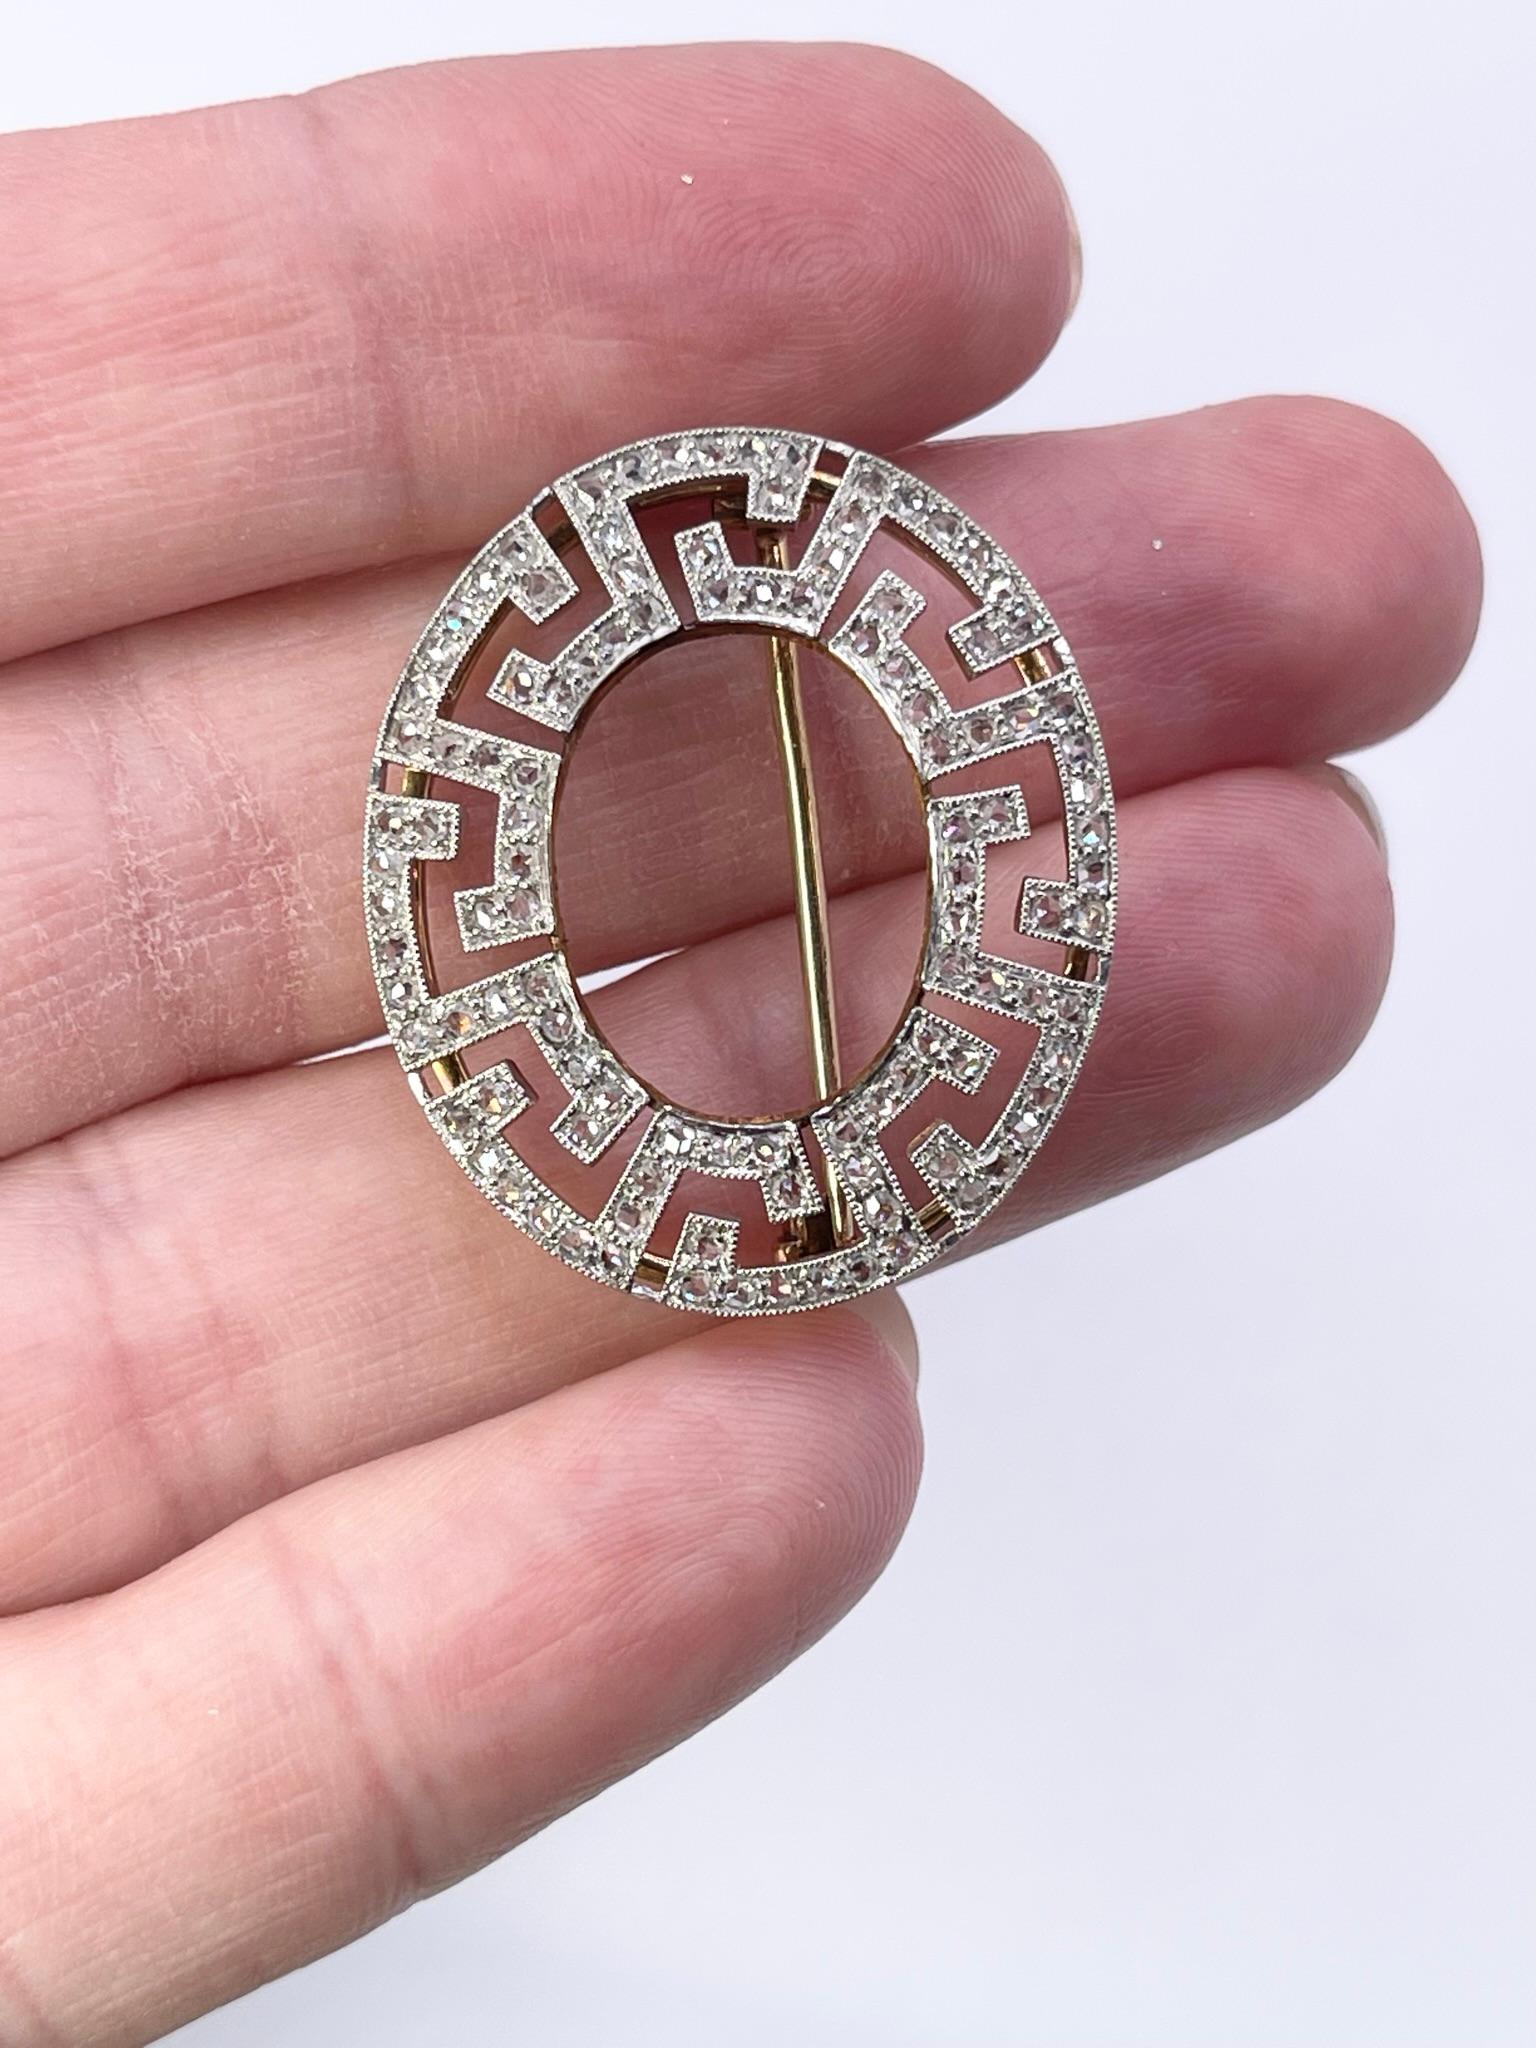 Pave Vintage Brooch Art Deco Style Brooch 14kt White Gold 0.45ct Natural Diamond In Excellent Condition For Sale In Jupiter, FL